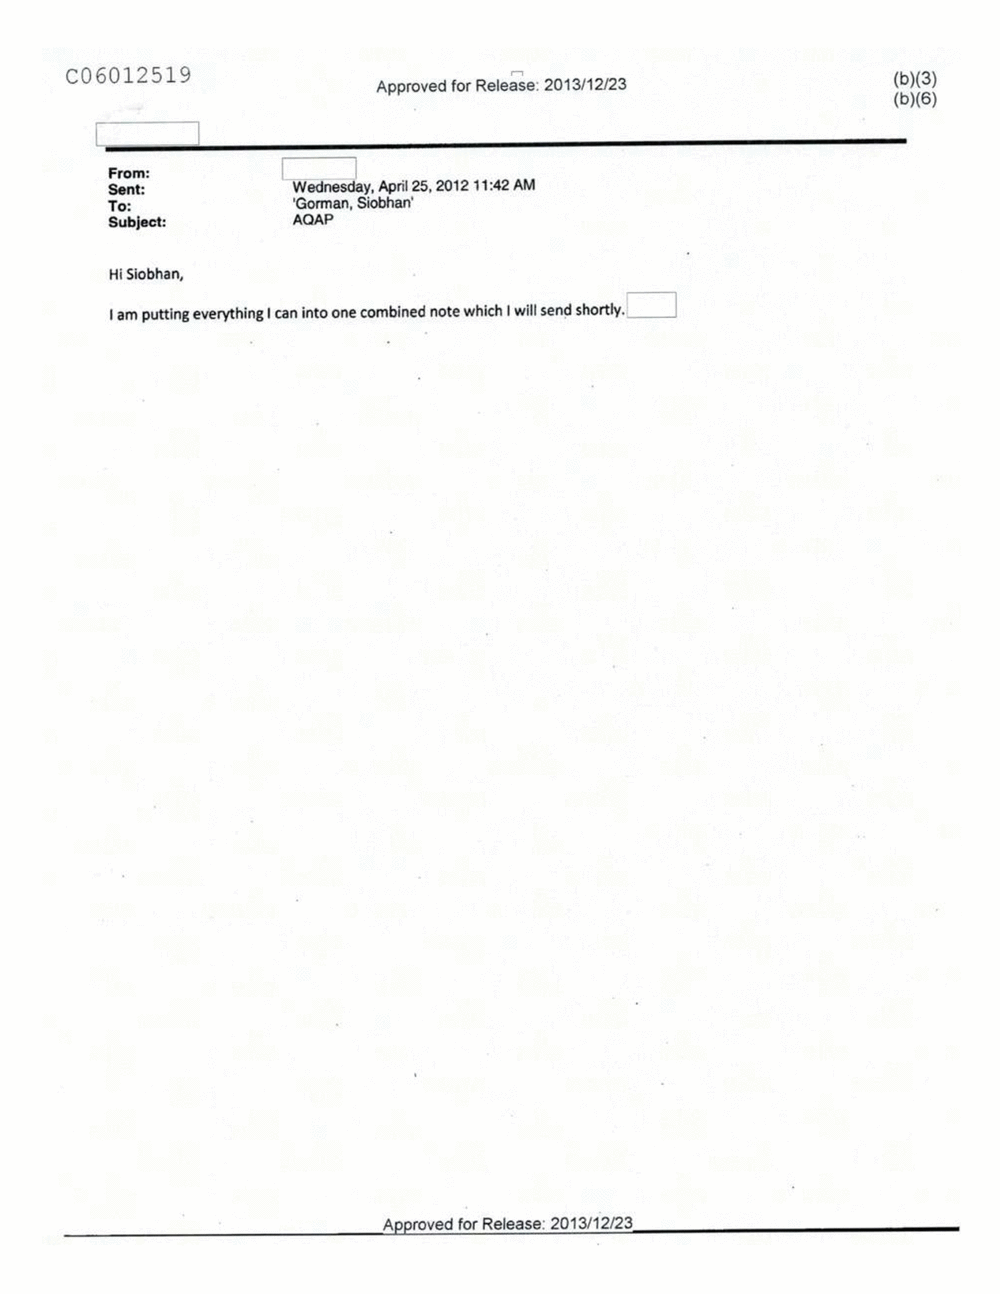 Page 39 from Email Correspondence Between Reporters and CIA Flacks